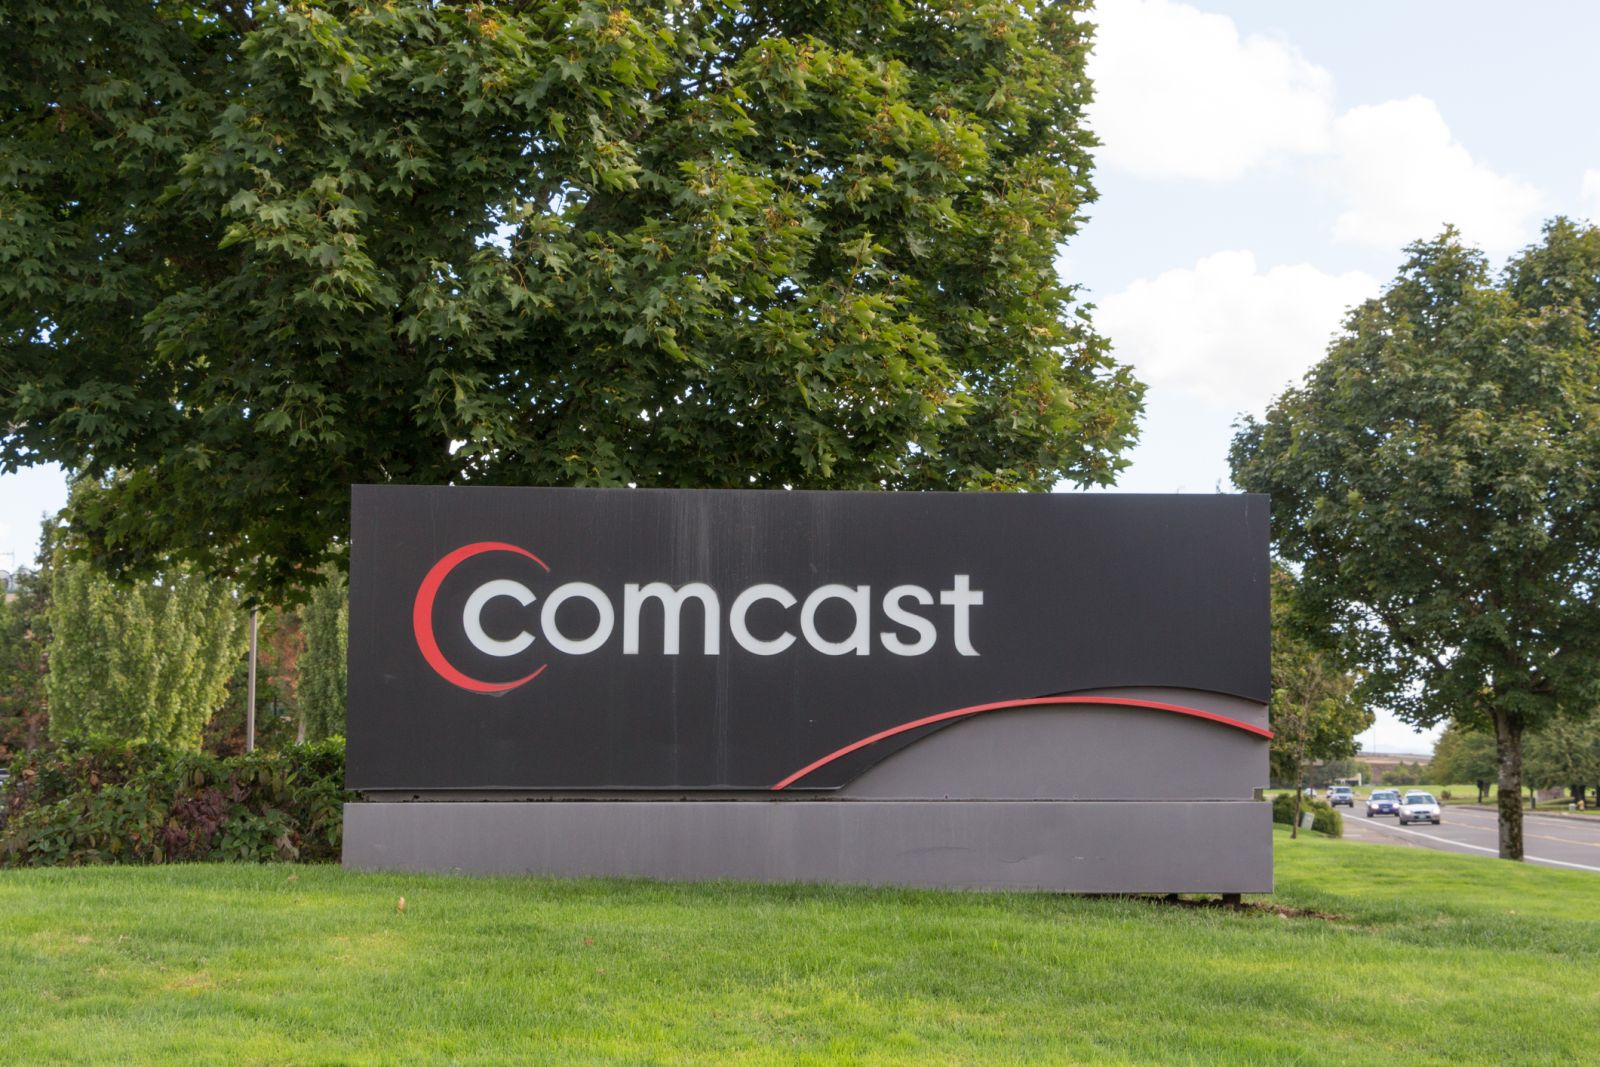 Communication Services - Comcast Corp sign by- SweetBabeeJay via iStock